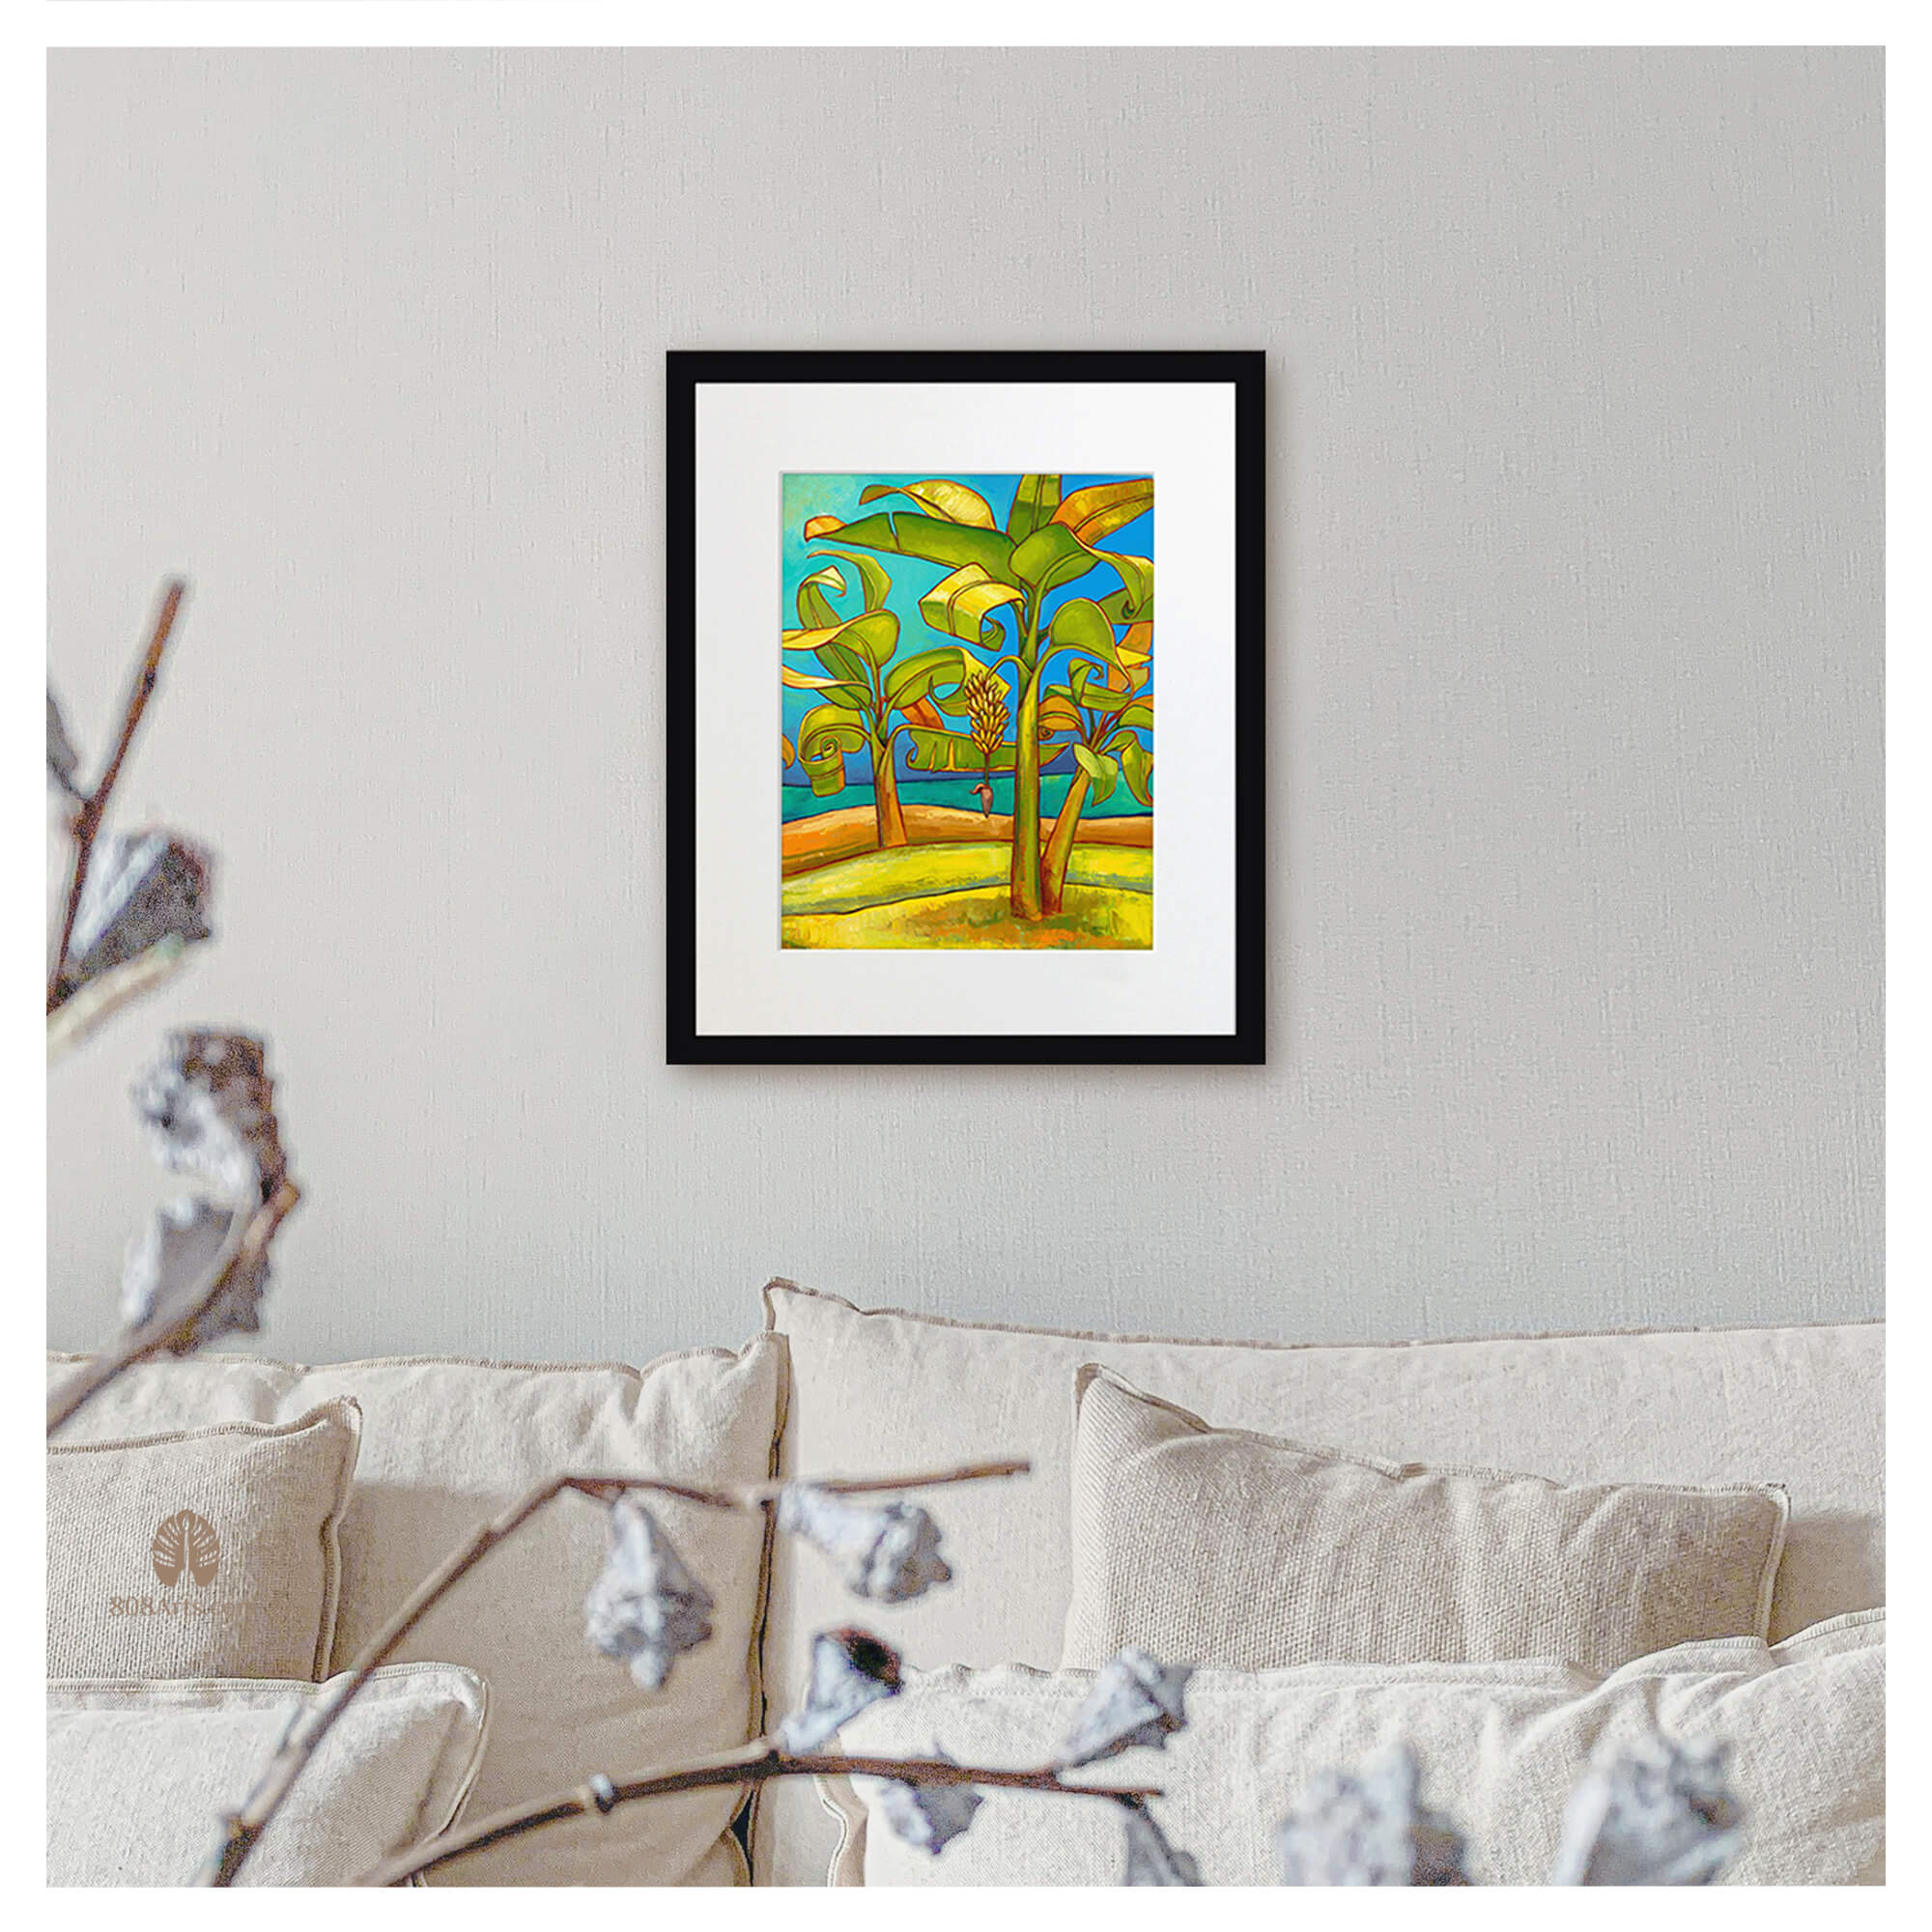 A yellow hued beach with banana trees by Hawaii artist Colin Redican